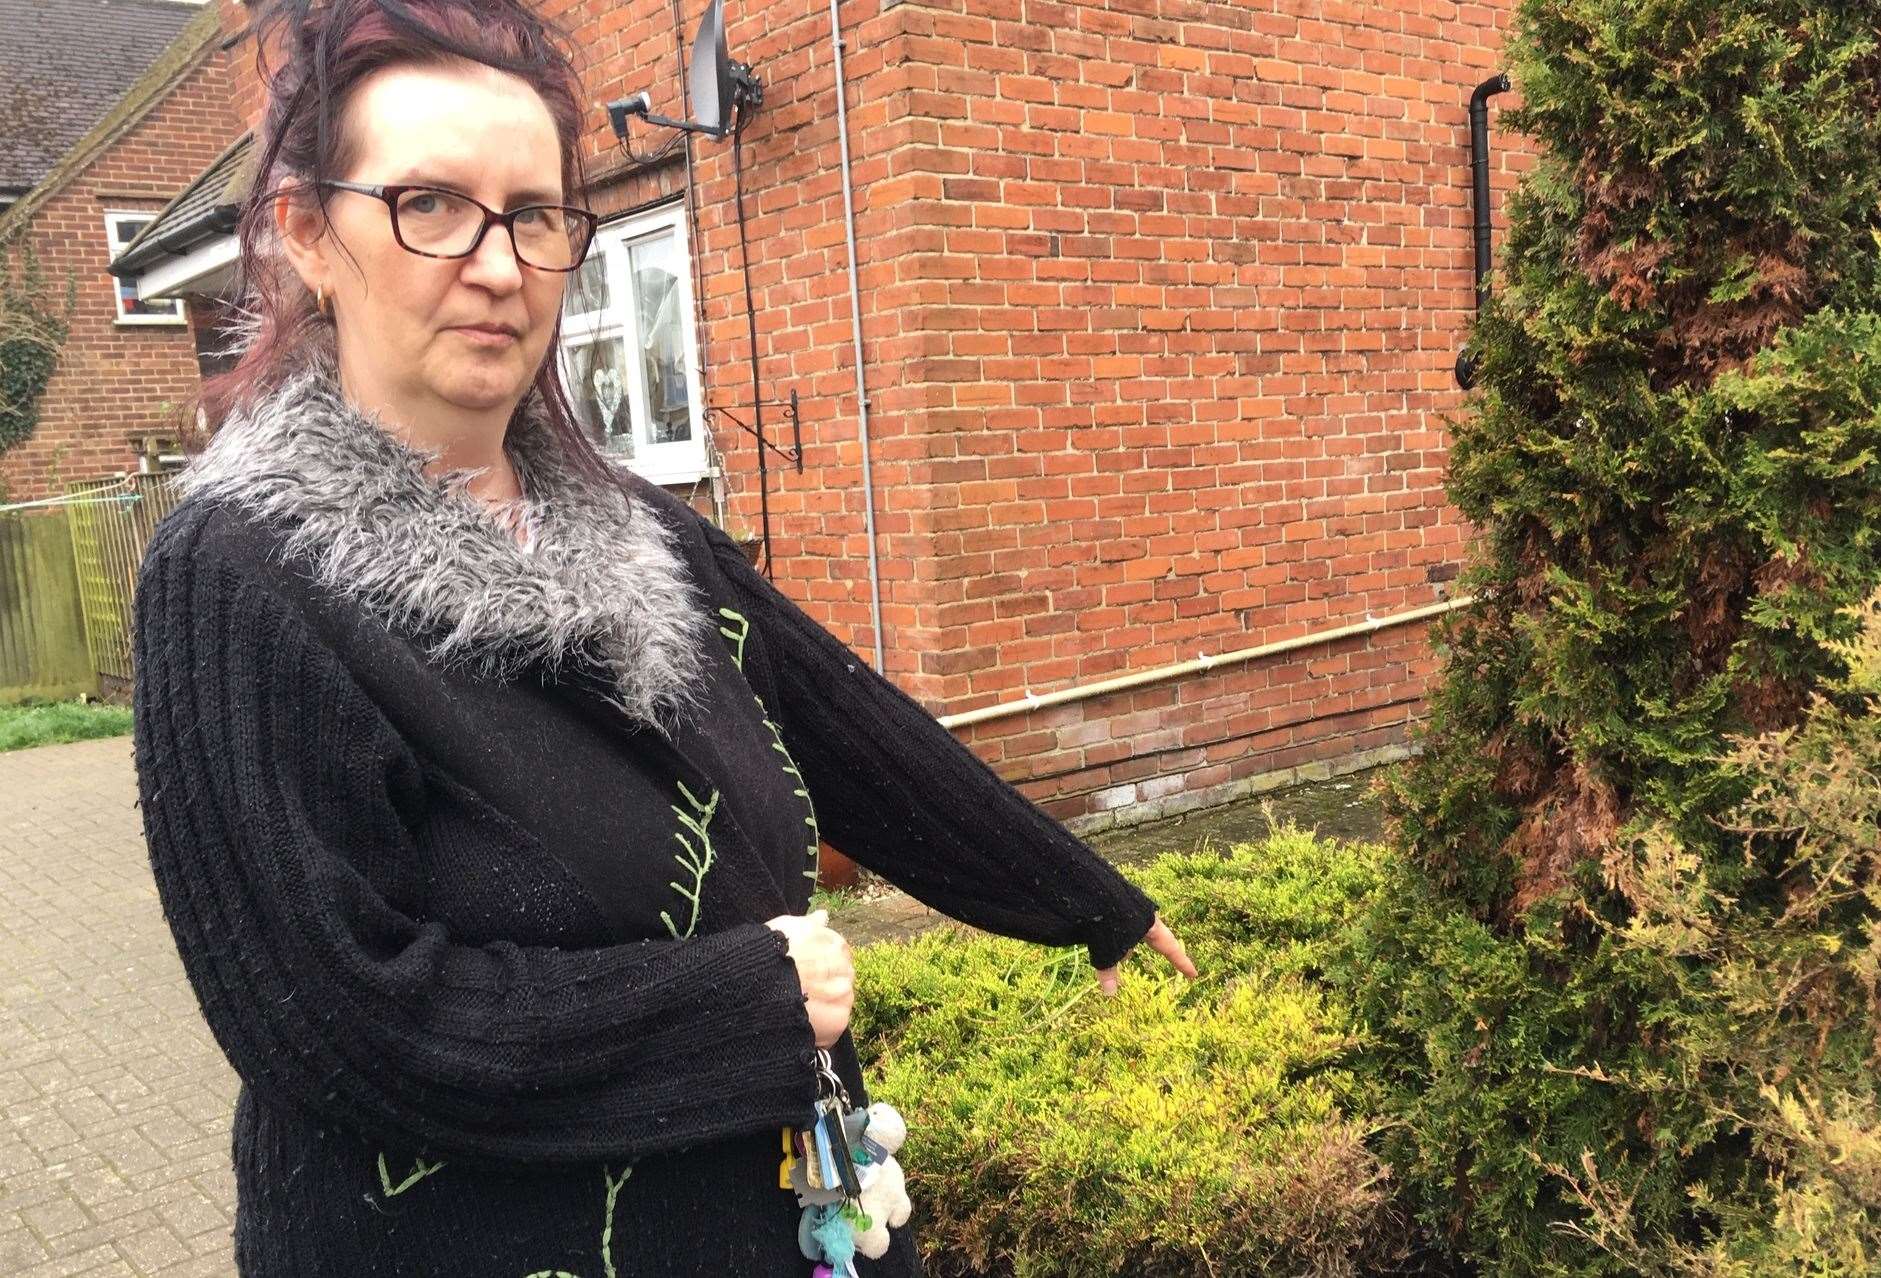 Jane Roberts saw six of the rodents outside her home last Friday